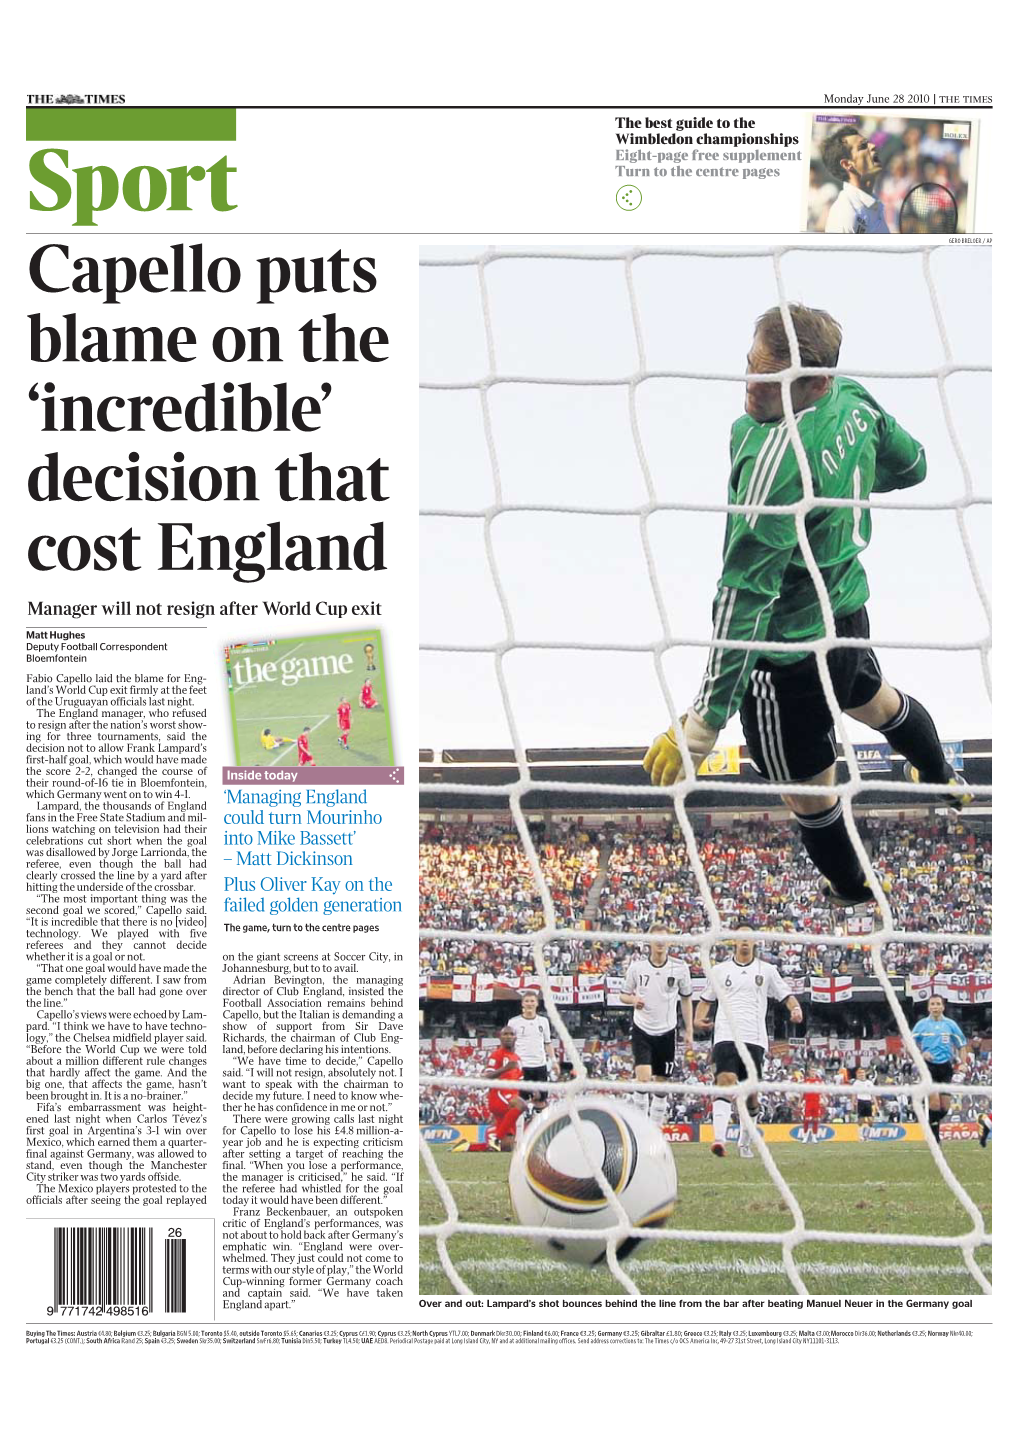 Capello Puts Blame on the ‘Incredible’ Decision That Cost England Manager Will Not Resign After World Cup Exit